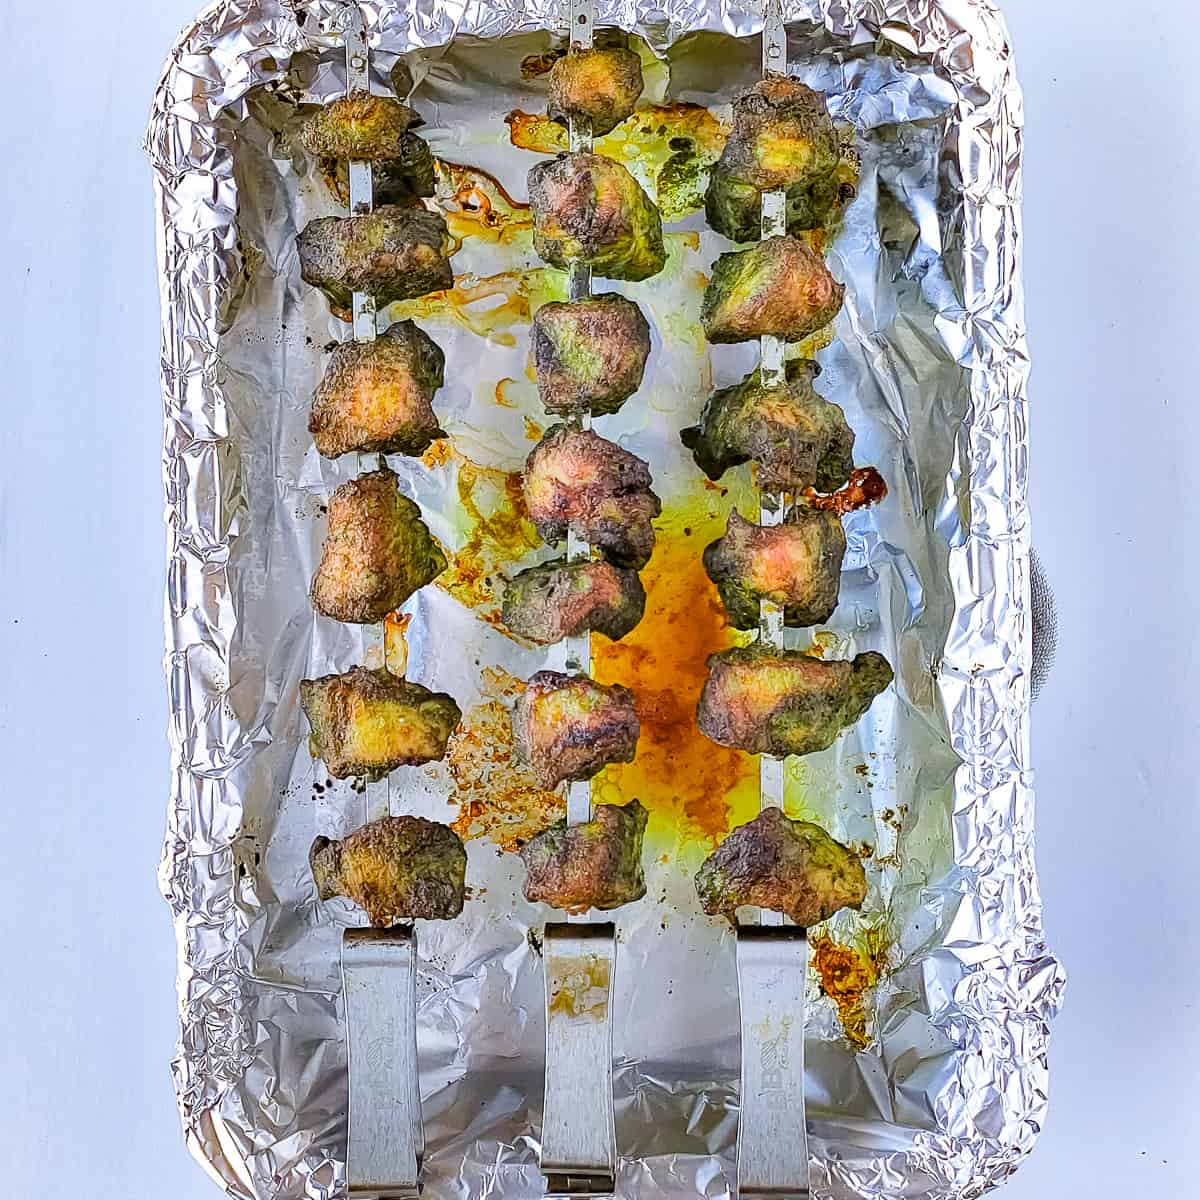 Roasted chicken hariyali tikka on skewers placed on a baking tray lined with foil.